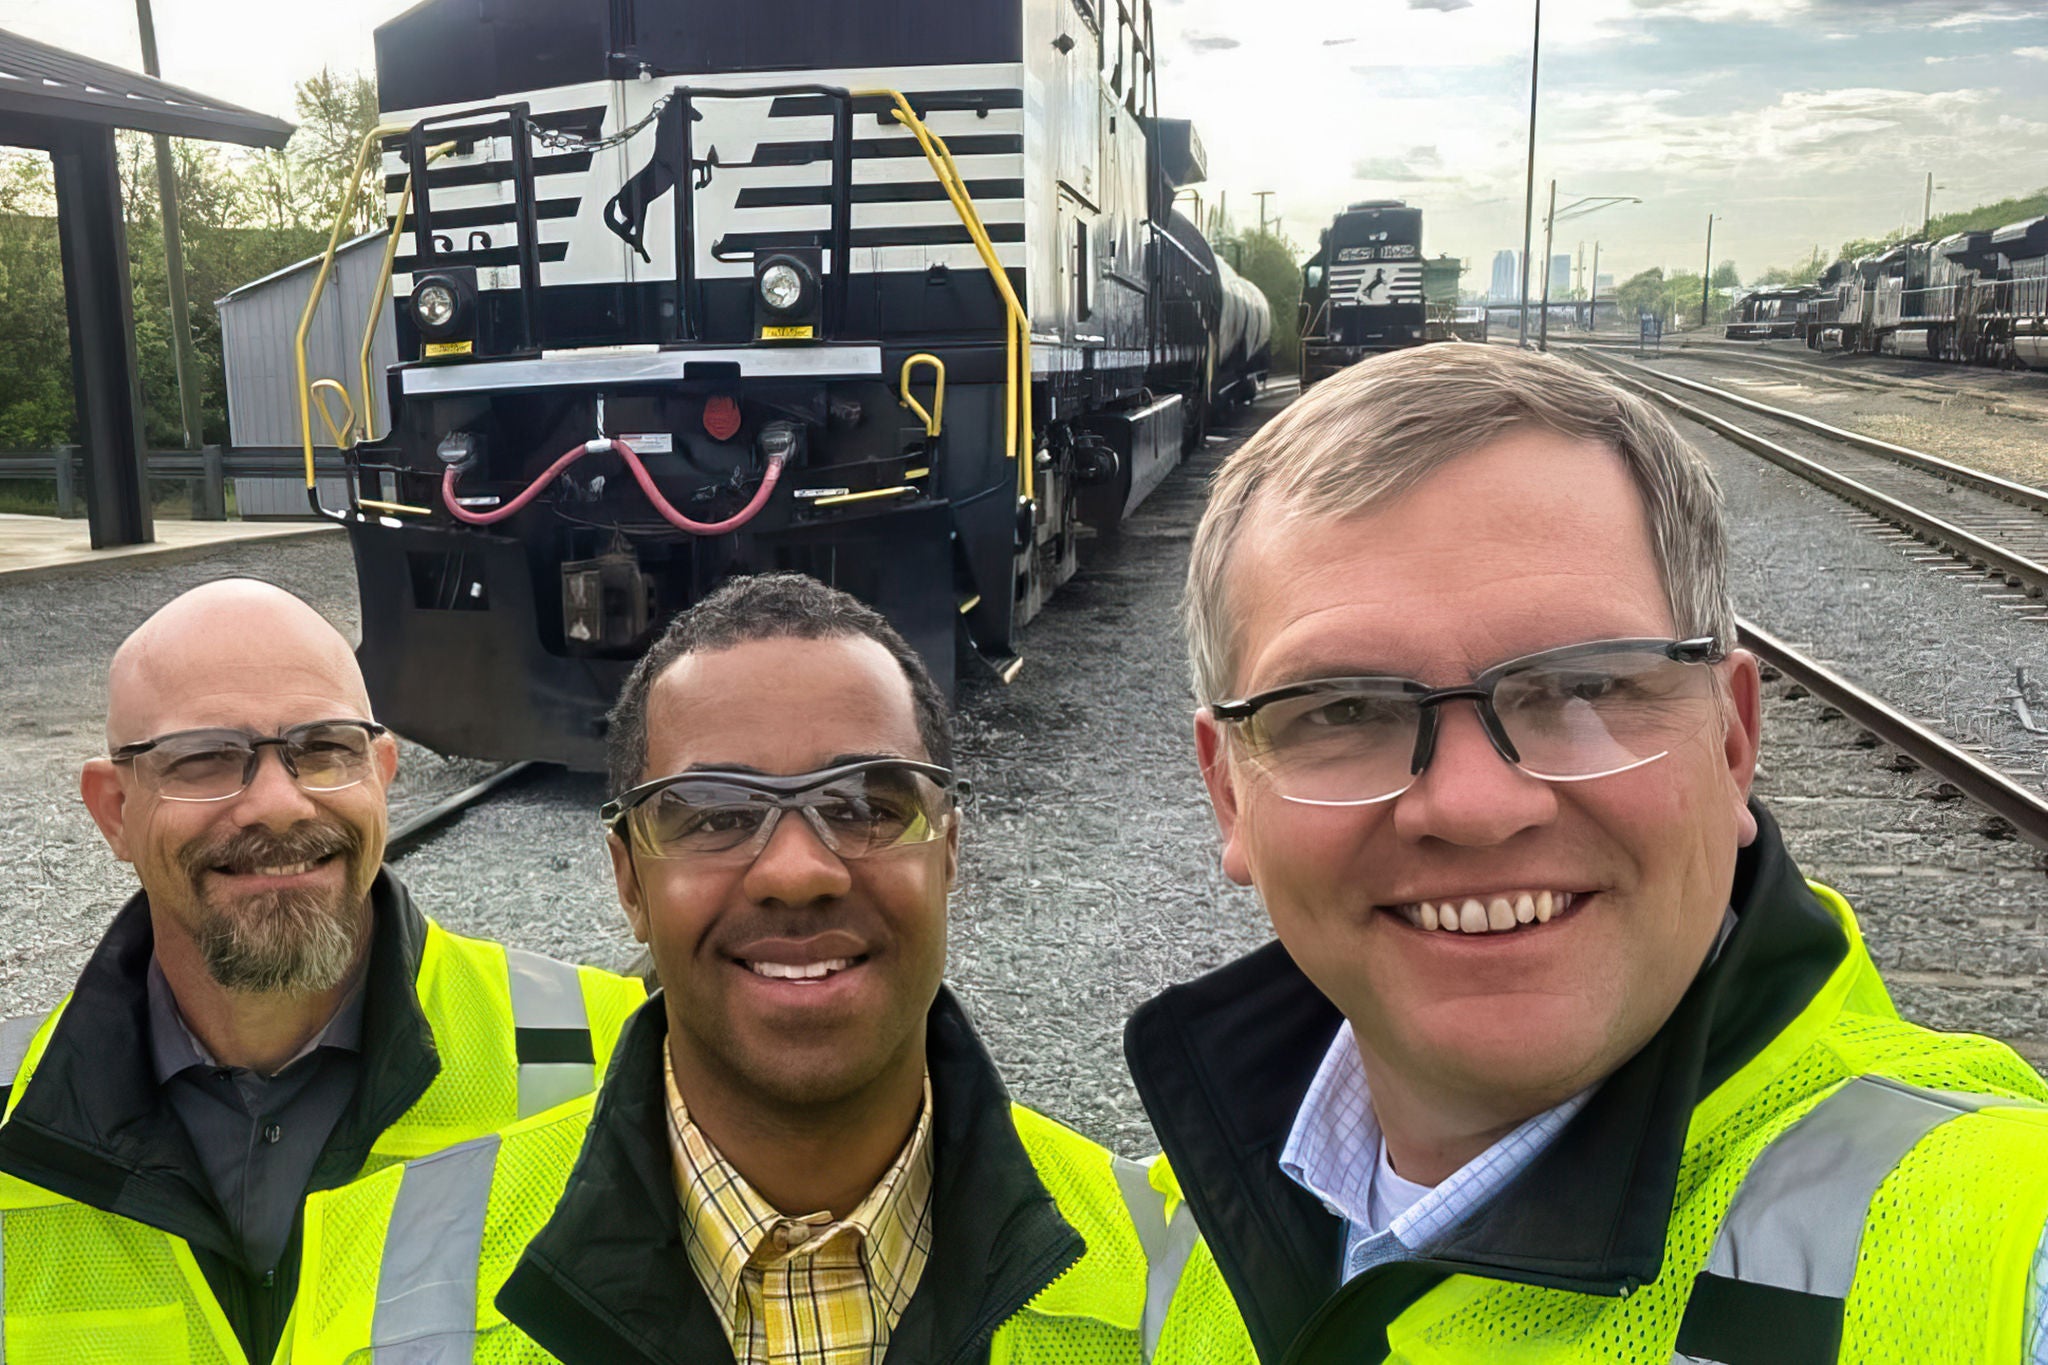 Norfolk Sothern CEO and two employees are on site at an intermodal transport working on DEI initiatives. 